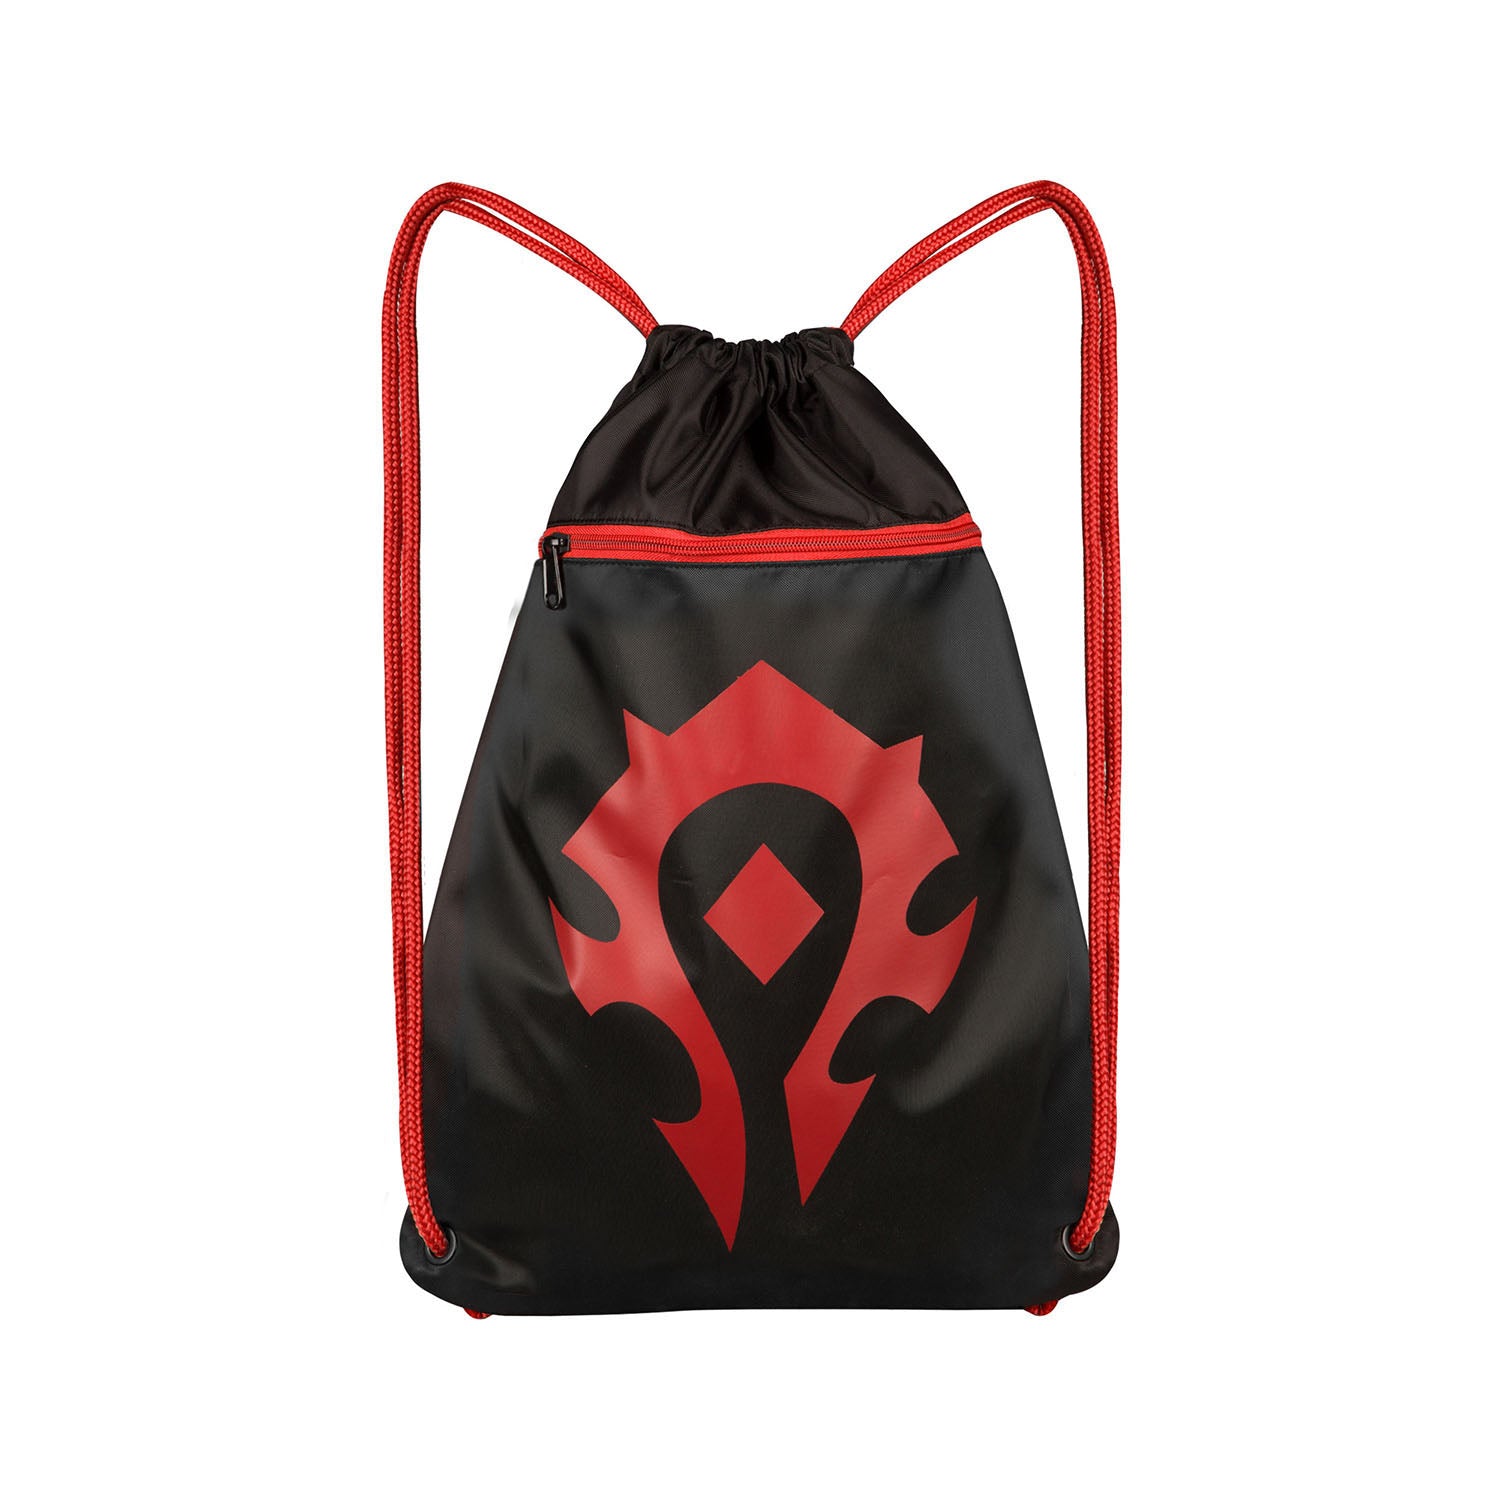 World of Warcraft J!NX Horde Loot Bag in Black - Front View